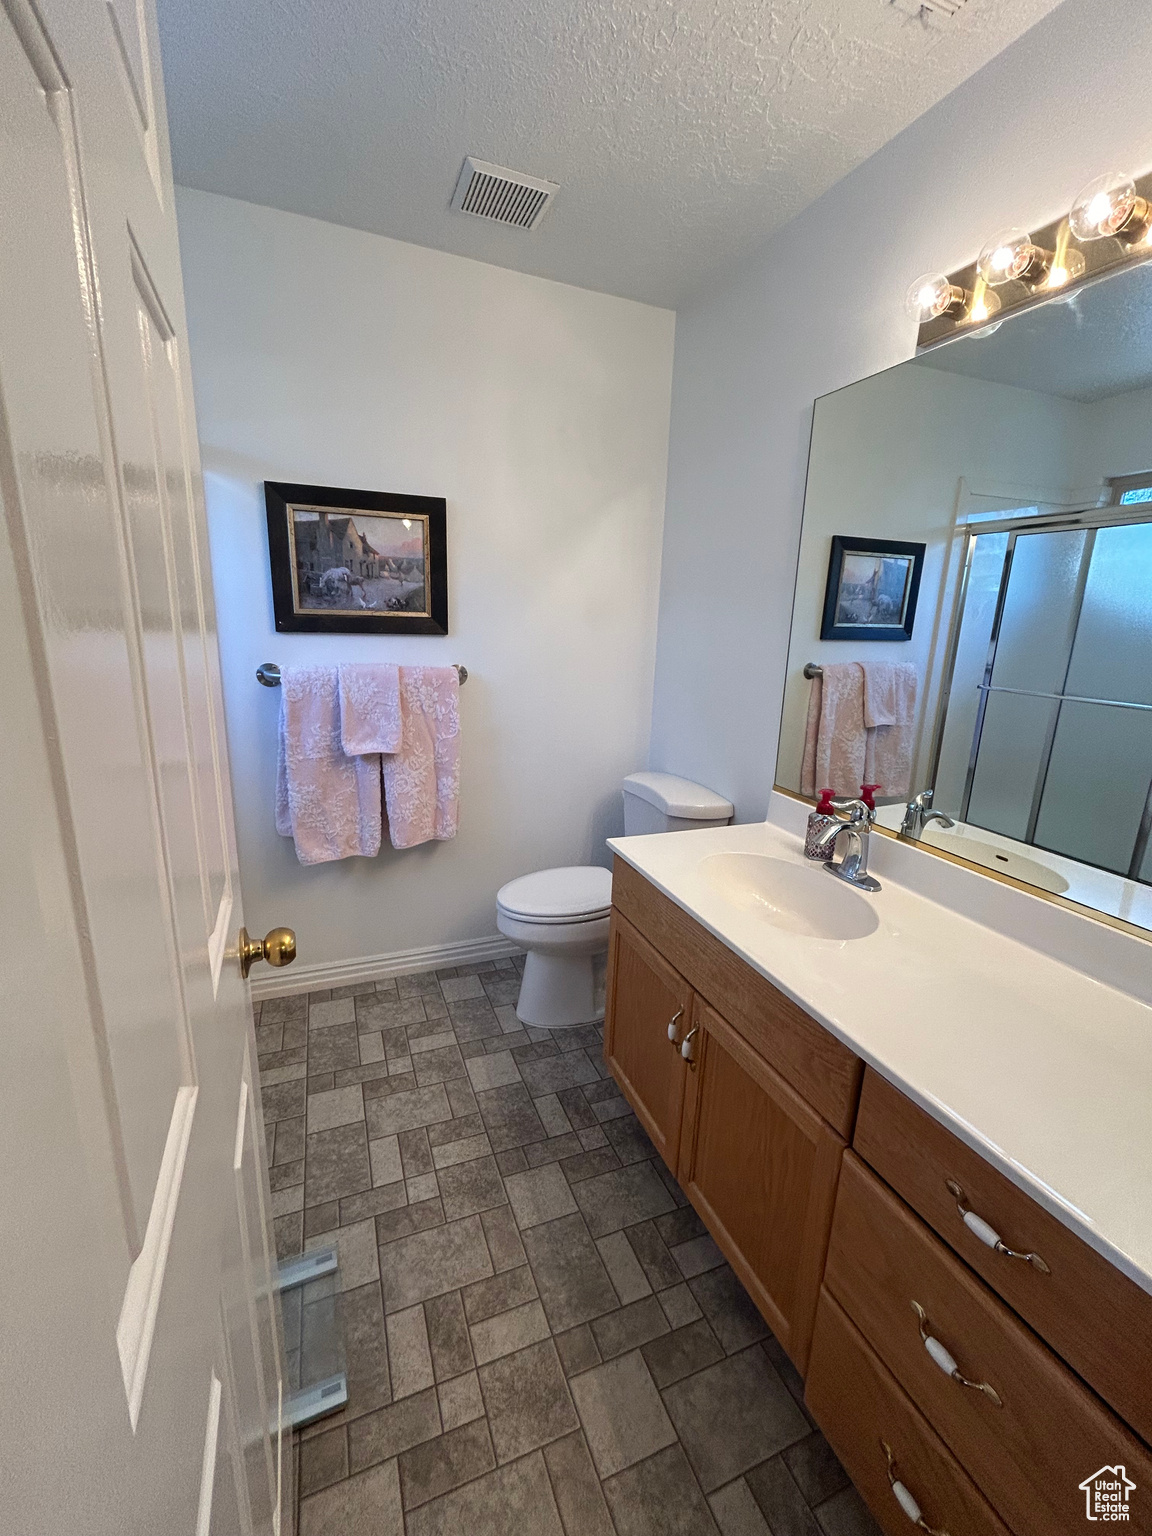 Bathroom featuring tile flooring, oversized vanity, toilet, and a textured ceiling